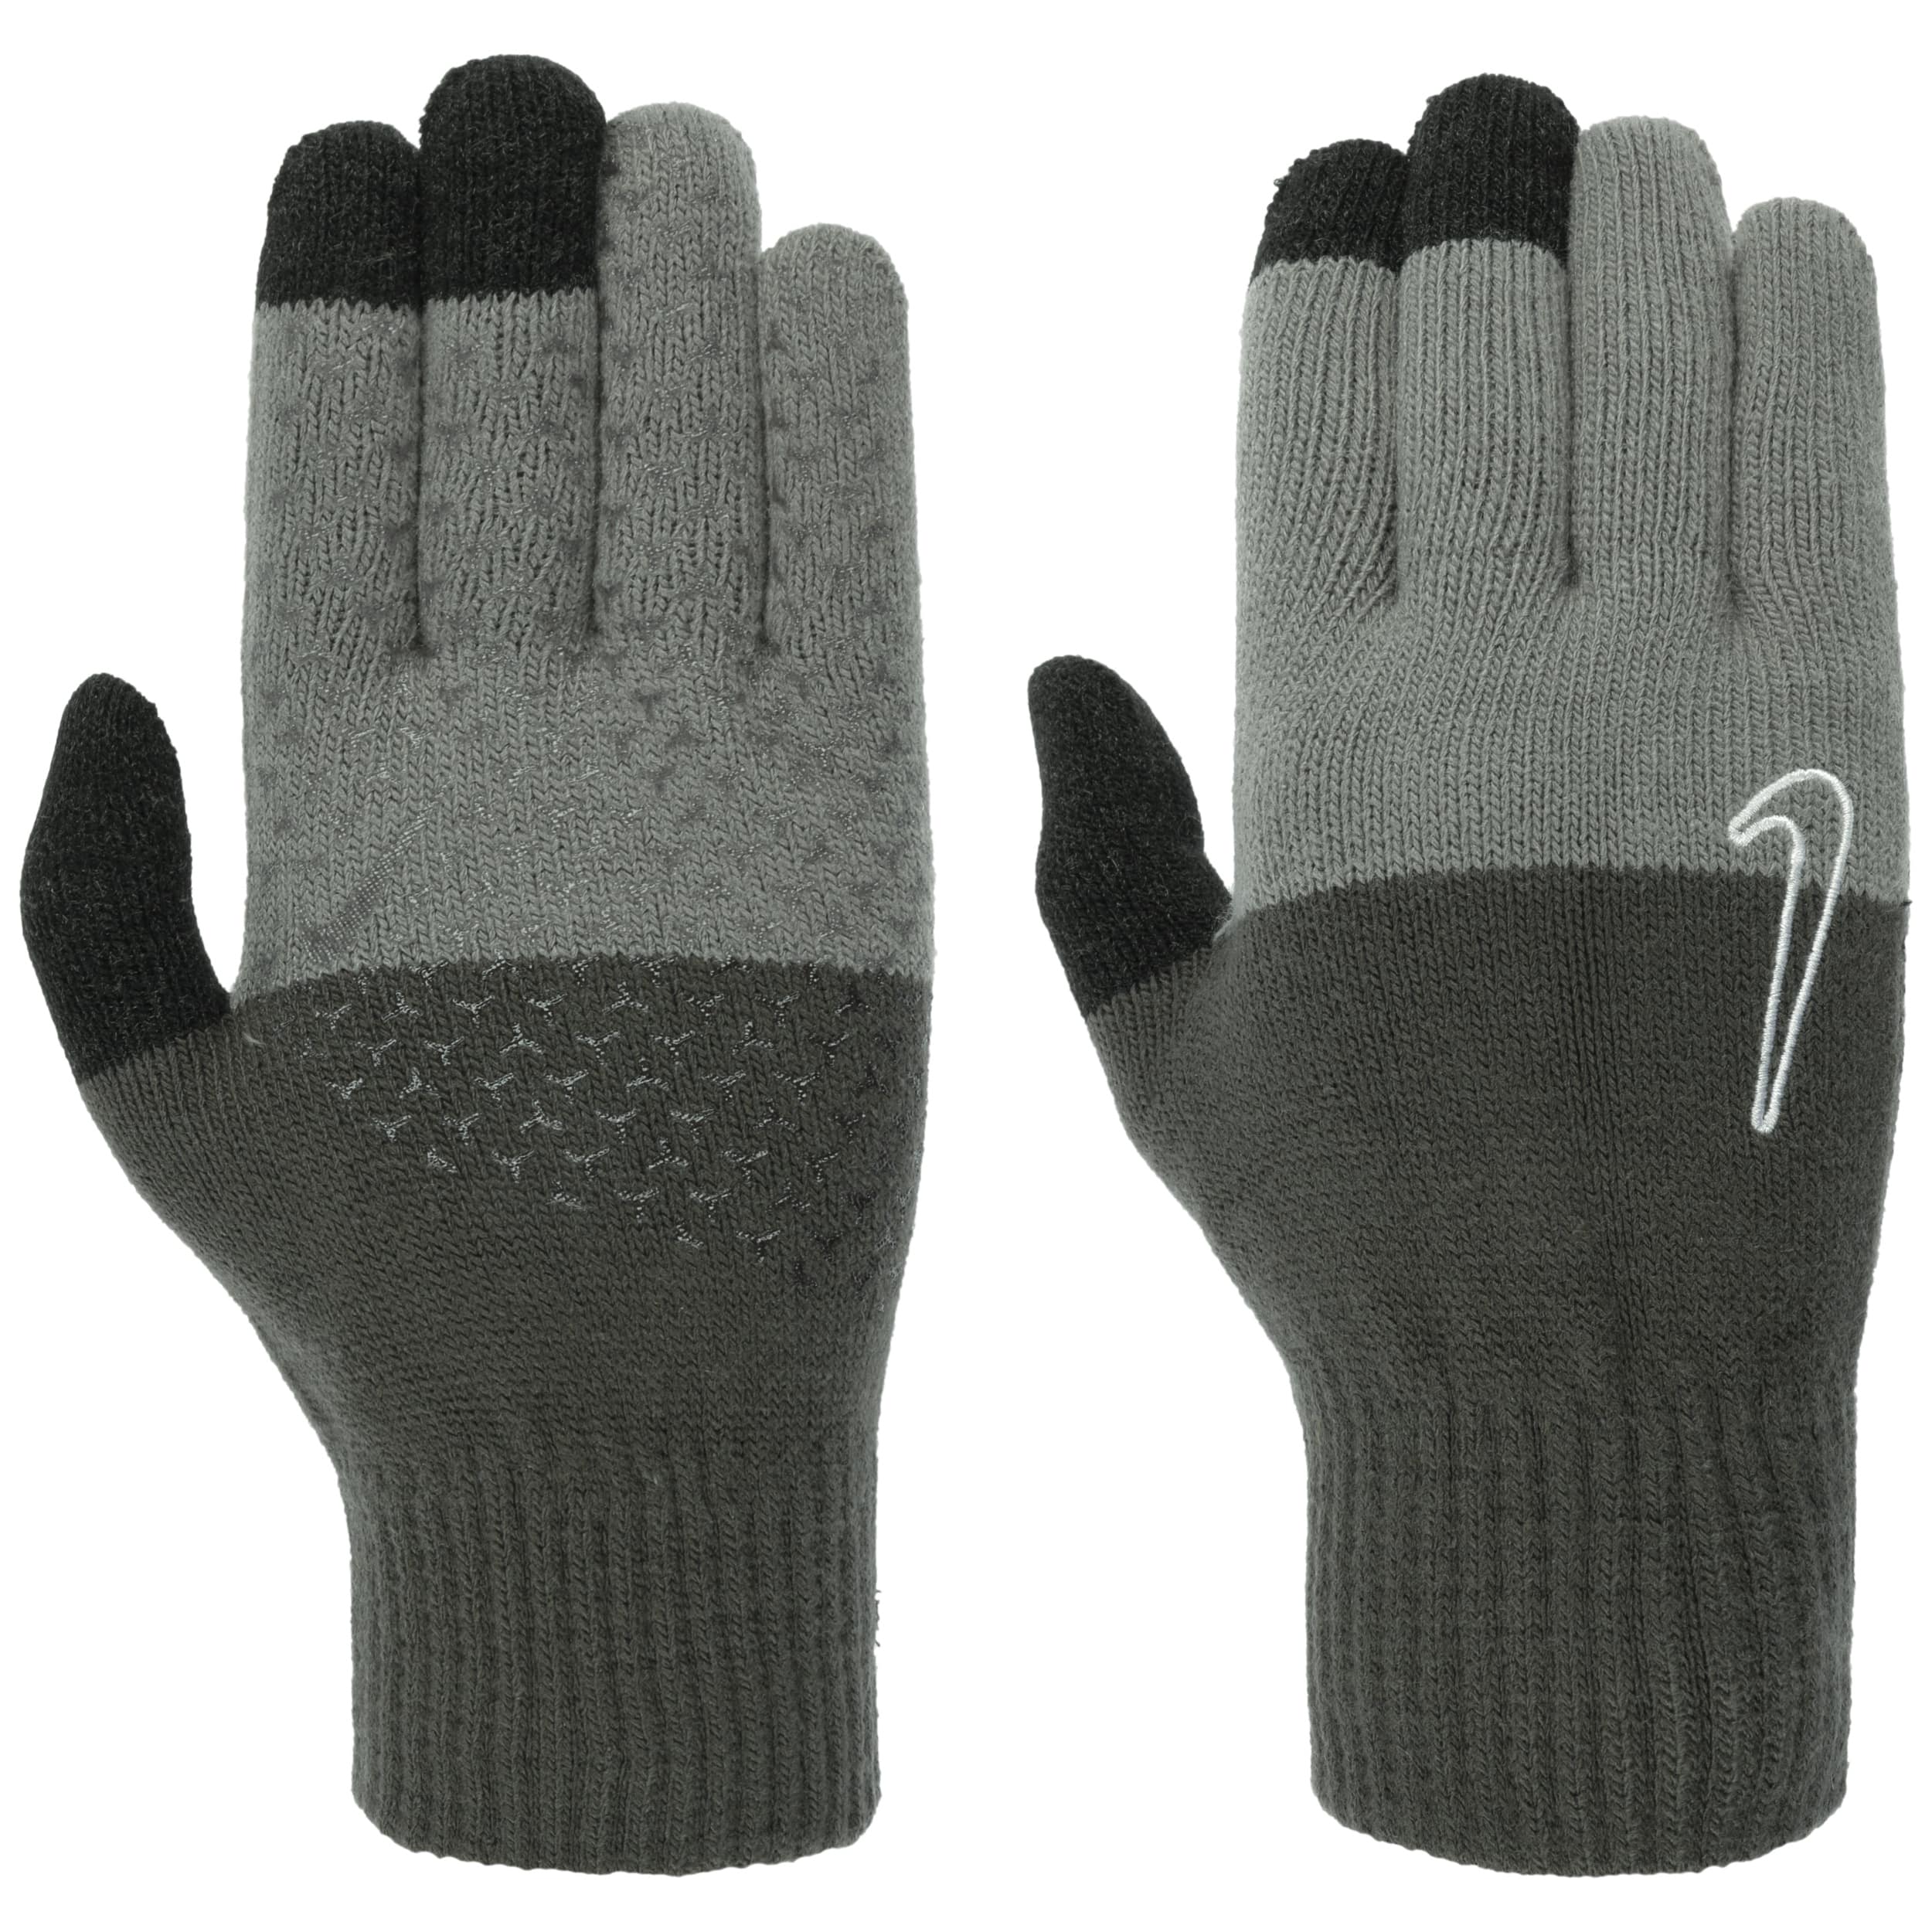 € Nike Tech Handschuhe by Graphic 2.0 25,95 - Grip TG Knit